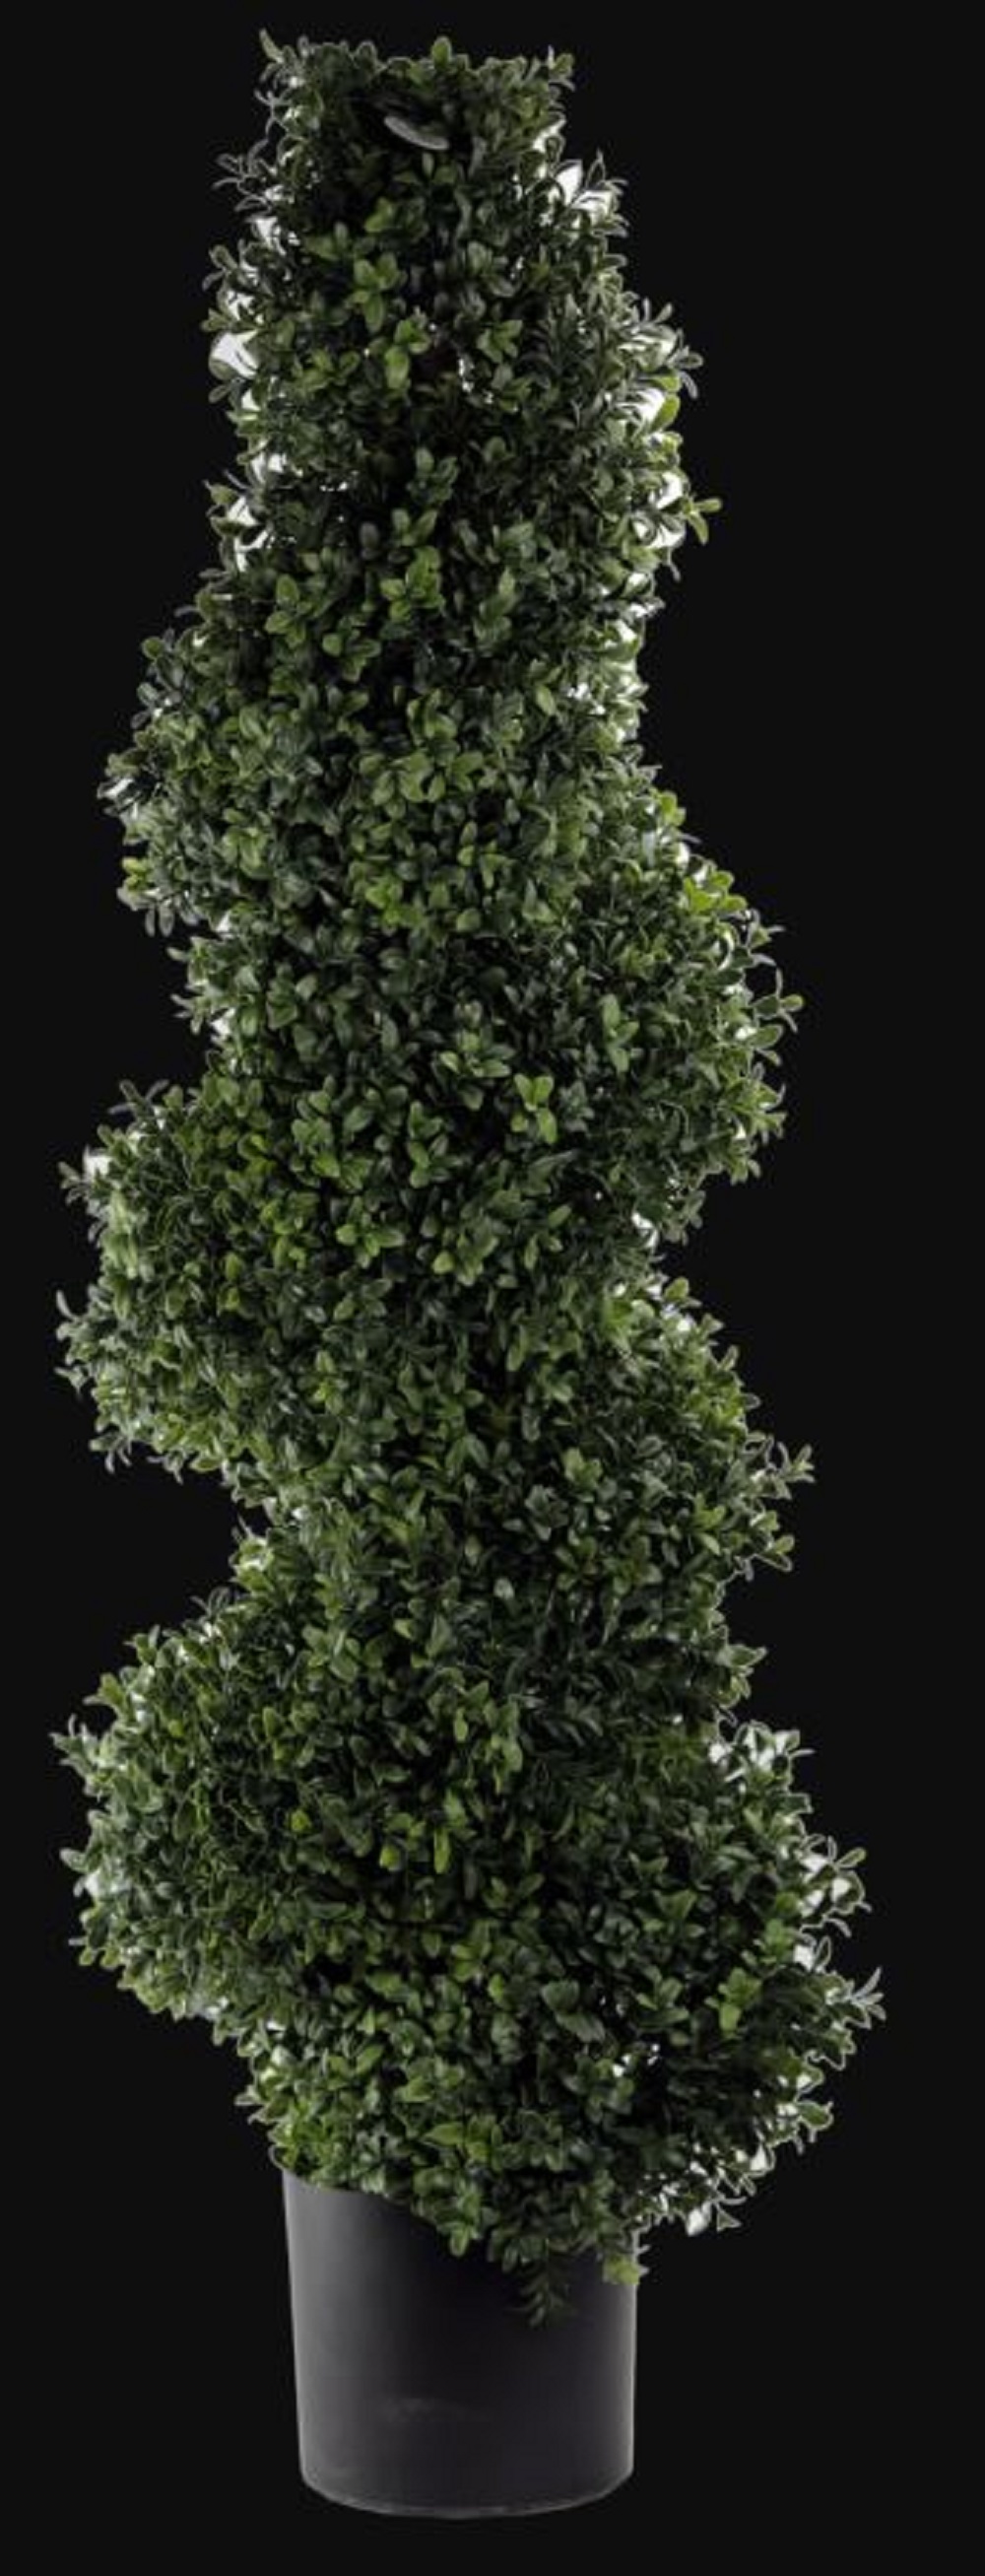 Regency 45" Artificial Deluxe Spiral Boxwood Topiary